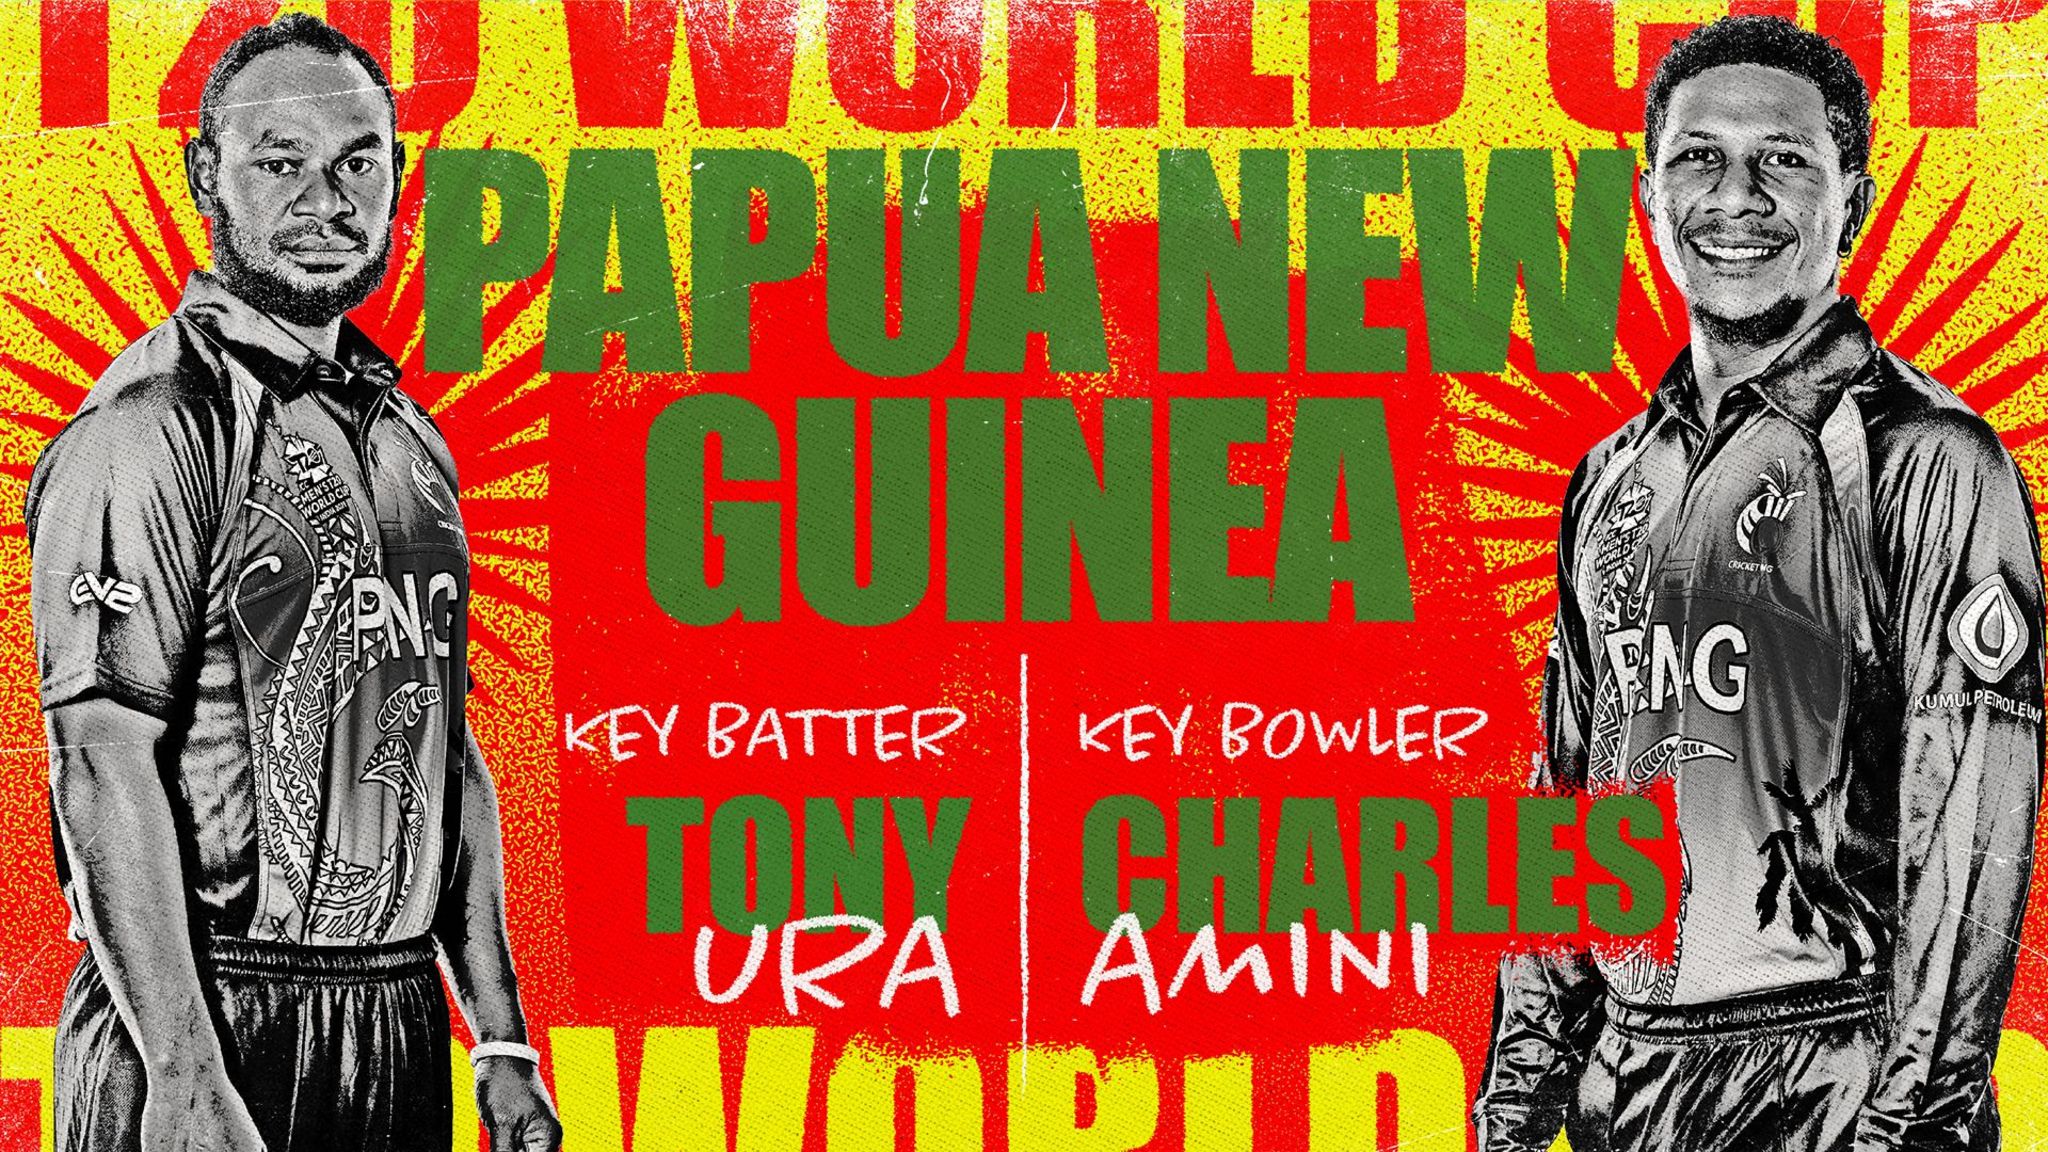 A graphic showing Tony Ura and Charles Amini as Papua New Guinea's key batter and bowler at the Men's T20 World Cup